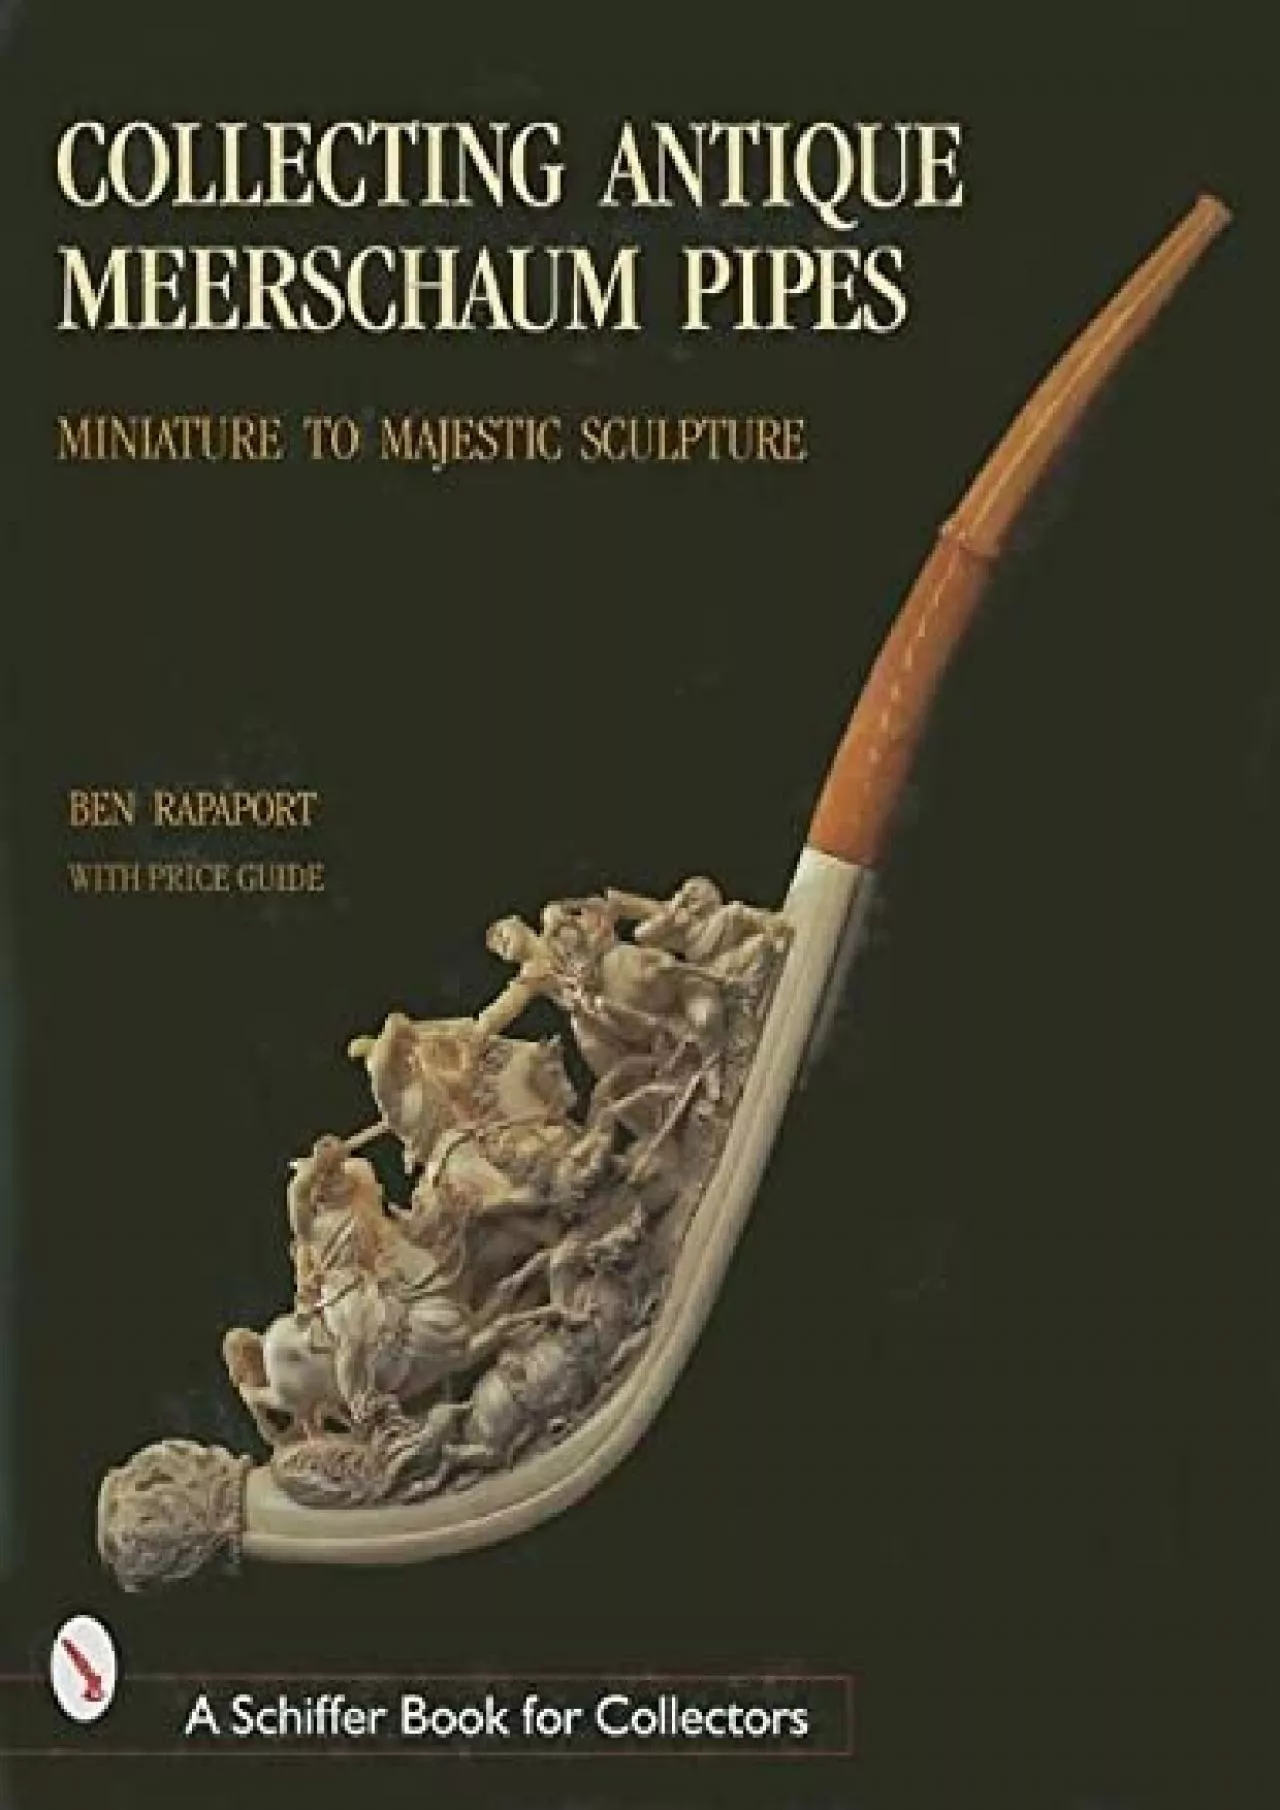 [READ]-Collecting Antique Meerschaum Pipes: Miniature to Majestic Sculpture (A Schiffer